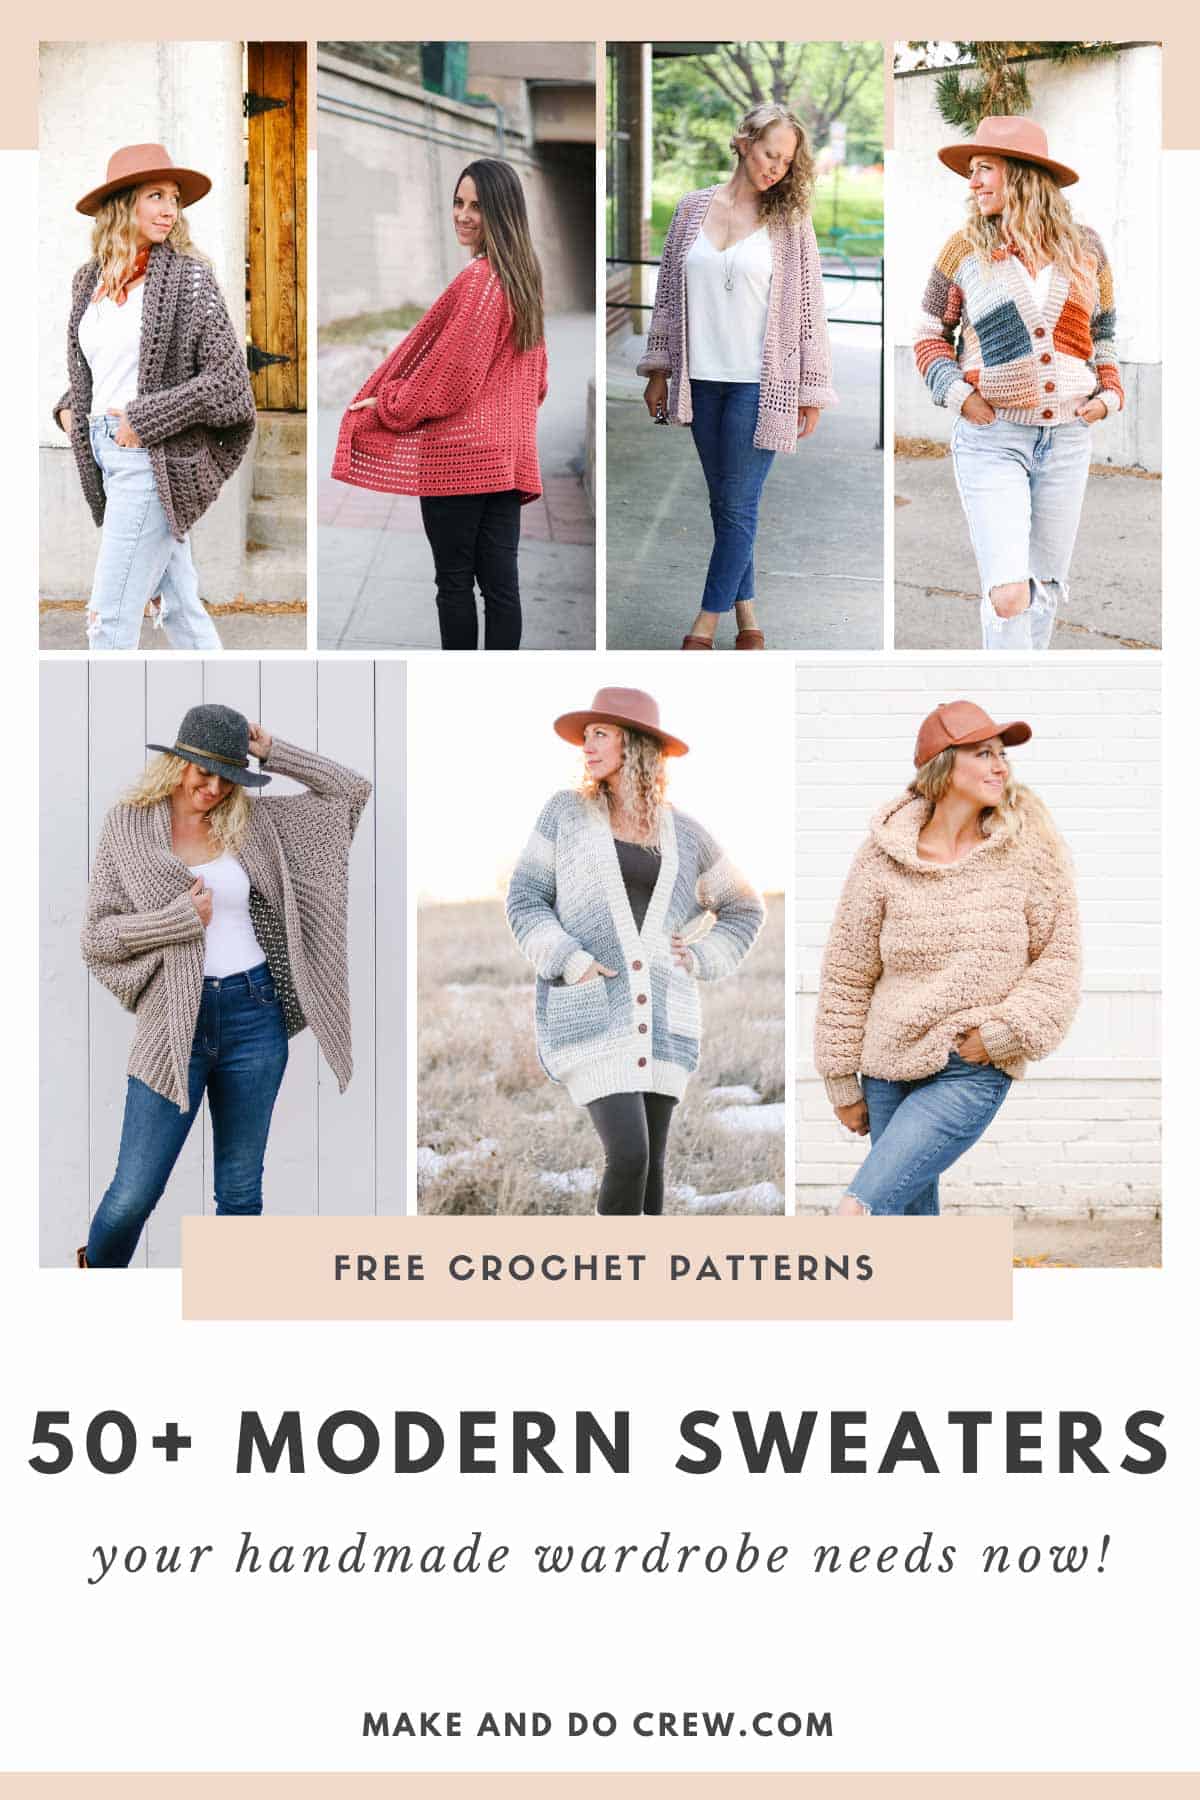 This image shows off seven free modern crochet sweater patterns made with Lion Brand Yarn. Designed and created by Jess Coppom at Make and Do Crew.